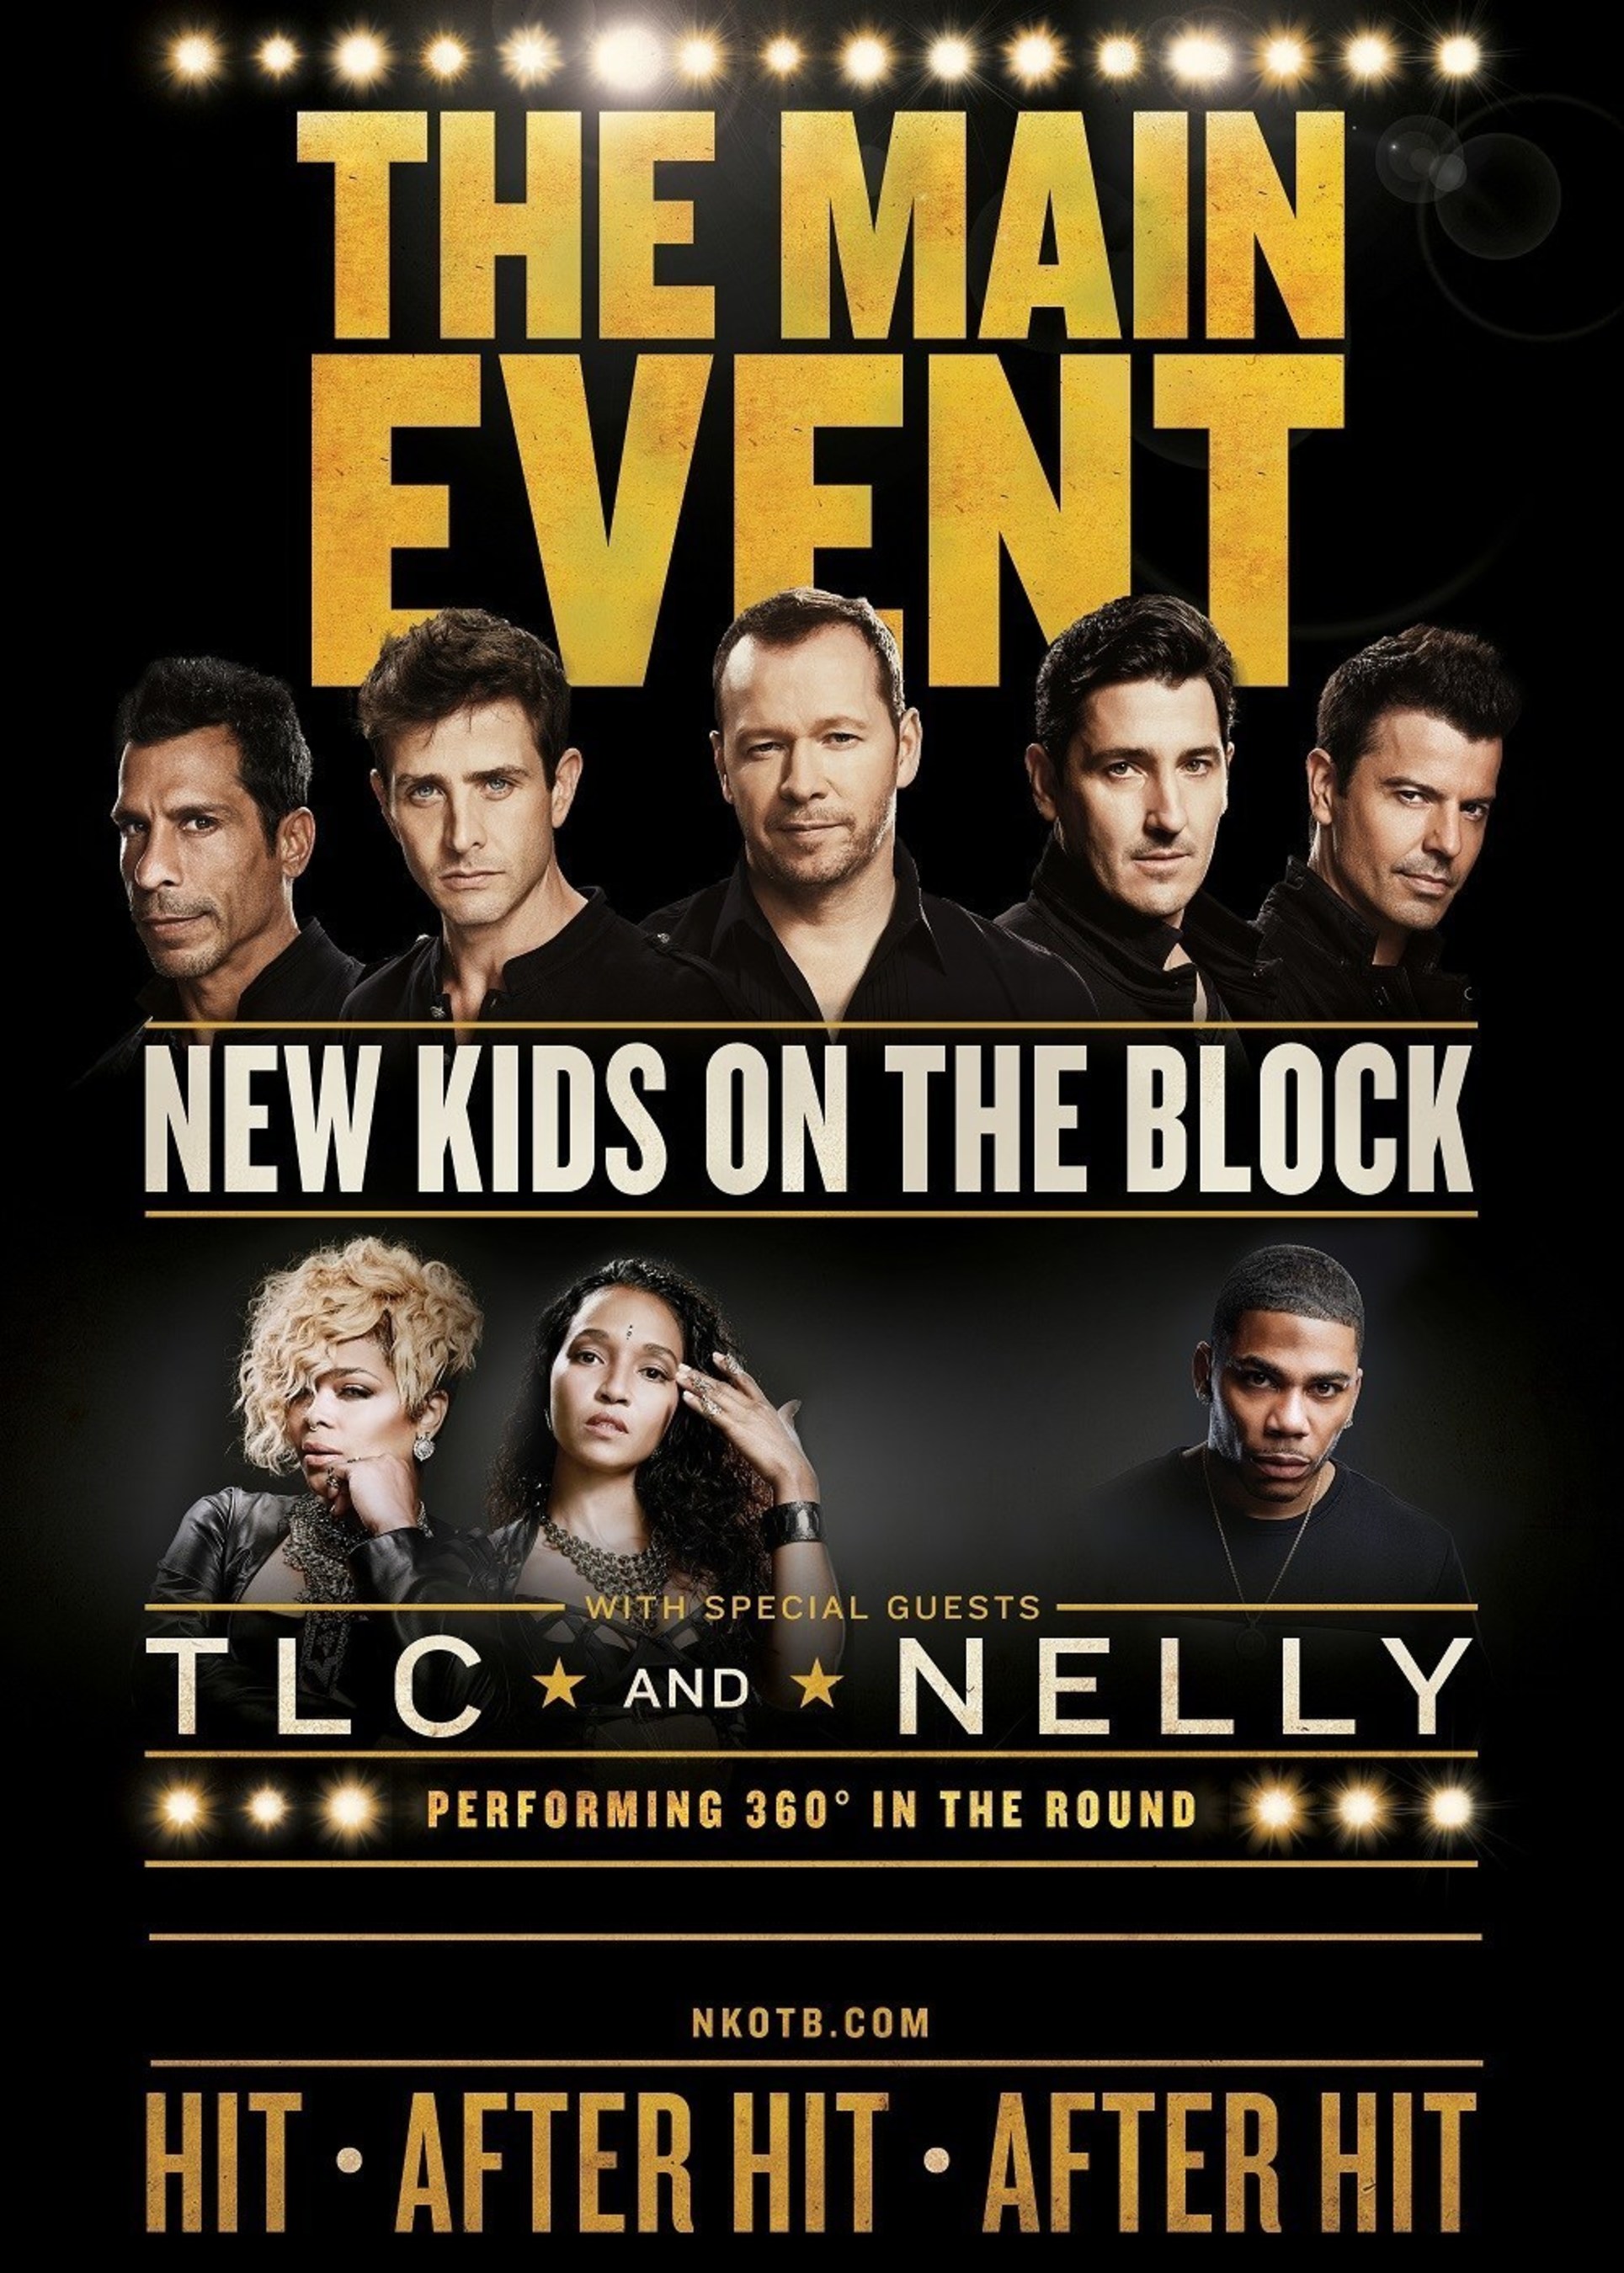 NEW KIDS ON THE BLOCK ANNOUNCE THE MAIN EVENT TOUR WITH SPECIAL GUESTS TLC AND NELLY